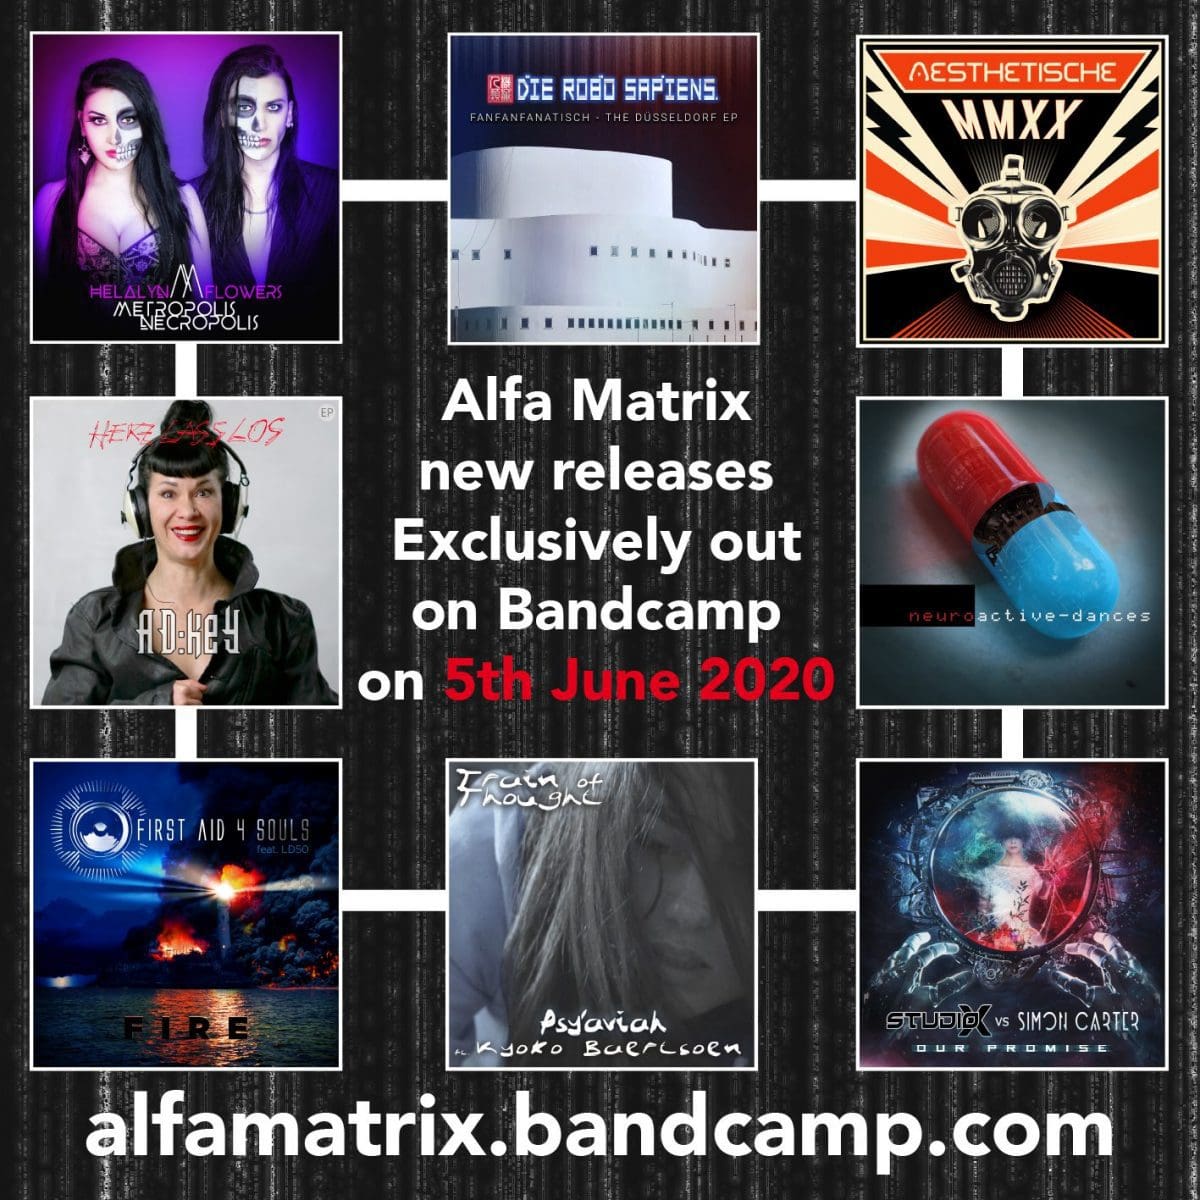 Alfa Matrix releases 8 new digital releases exclusively on Bandcamp incl. AD:keY, Aesthetische, Die Robo Sapiens, First Aid 4 Souls, Helalyn Flowers, Neuroactive, Psy'Aviah and Studio-X vs. Simon Carter